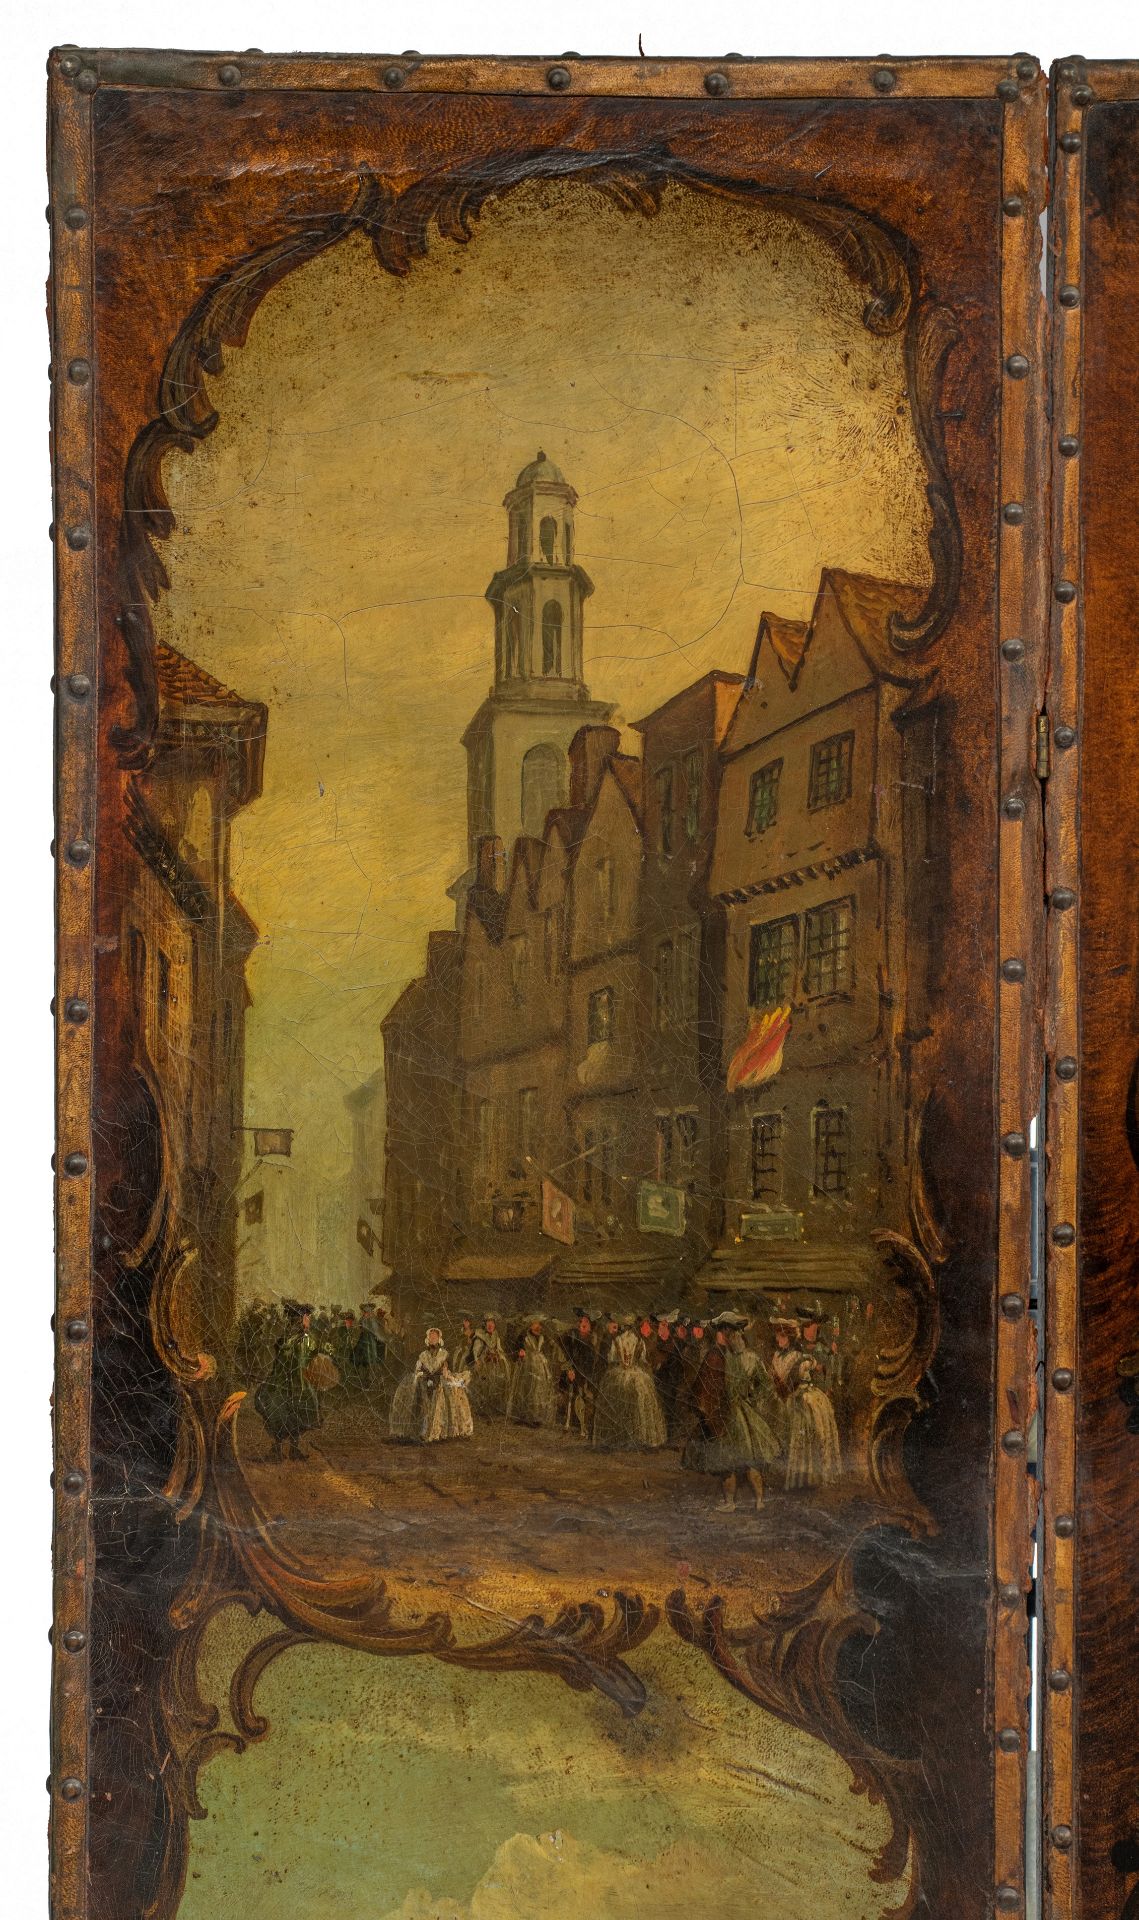 A six-panel screen depicting famous views of London, H 184 - W 6 x 41 cm - Image 13 of 23